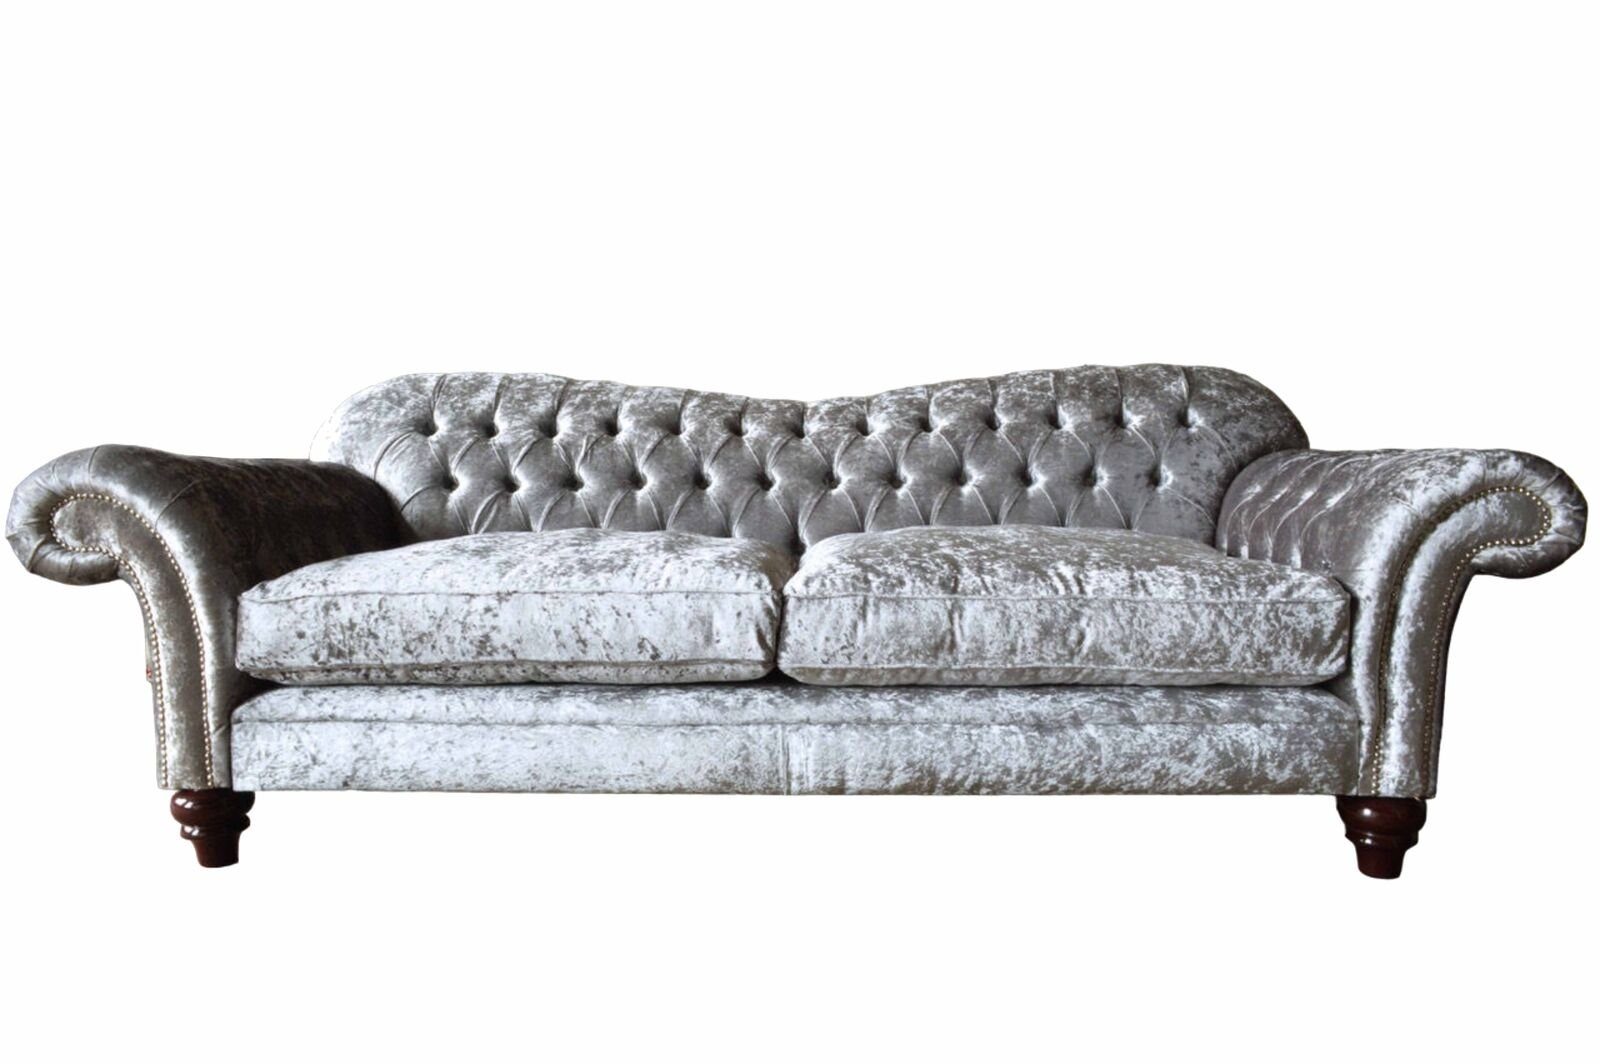 Textil, Grau Couch Sofa JVmoebel 3 Sofa Chesterfield Samt in Design Sitzer Made Europe